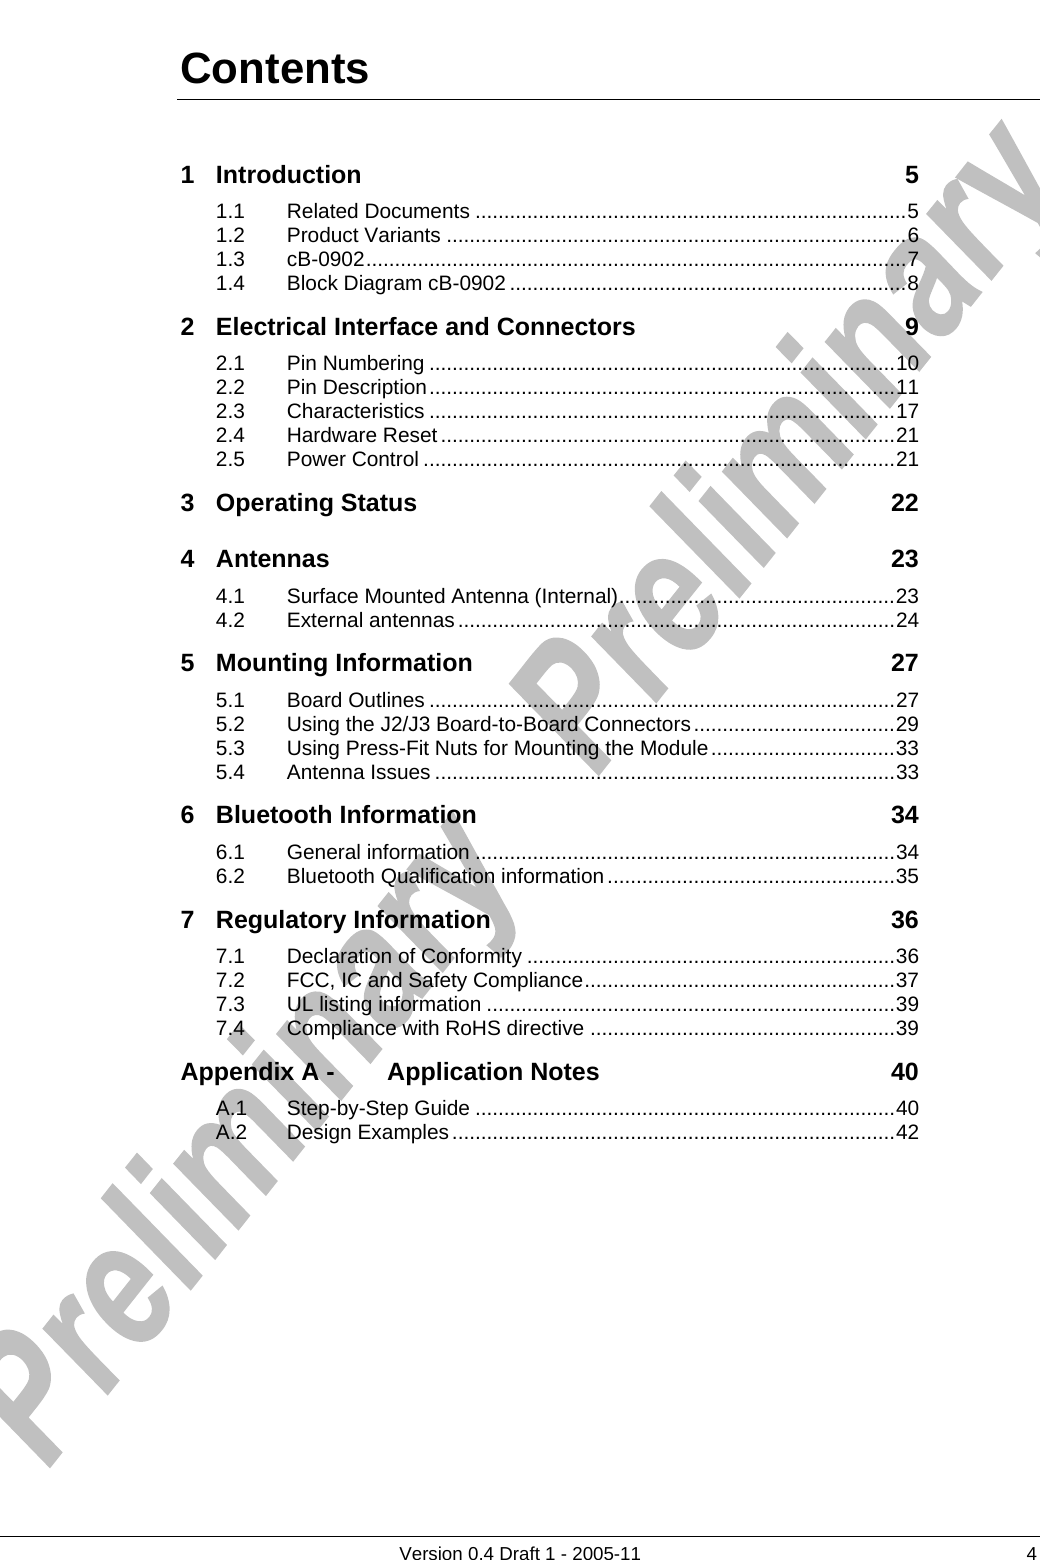          Version 0.4 Draft 1 - 2005-11  4 Contents 1 Introduction 5 1.1 Related Documents ...........................................................................5 1.2 Product Variants ................................................................................6 1.3 cB-0902..............................................................................................7 1.4 Block Diagram cB-0902 .....................................................................8 2 Electrical Interface and Connectors 9 2.1 Pin Numbering .................................................................................10 2.2 Pin Description.................................................................................11 2.3 Characteristics .................................................................................17 2.4 Hardware Reset...............................................................................21 2.5 Power Control ..................................................................................21 3 Operating Status 22 4 Antennas 23 4.1 Surface Mounted Antenna (Internal)................................................23 4.2 External antennas............................................................................24 5 Mounting Information 27 5.1 Board Outlines .................................................................................27 5.2 Using the J2/J3 Board-to-Board Connectors...................................29 5.3 Using Press-Fit Nuts for Mounting the Module................................33 5.4 Antenna Issues ................................................................................33 6 Bluetooth Information 34 6.1 General information .........................................................................34 6.2 Bluetooth Qualification information..................................................35 7 Regulatory Information 36 7.1 Declaration of Conformity ................................................................36 7.2 FCC, IC and Safety Compliance......................................................37 7.3 UL listing information .......................................................................39 7.4 Compliance with RoHS directive .....................................................39 Appendix A - Application Notes 40 A.1 Step-by-Step Guide .........................................................................40 A.2 Design Examples.............................................................................42      